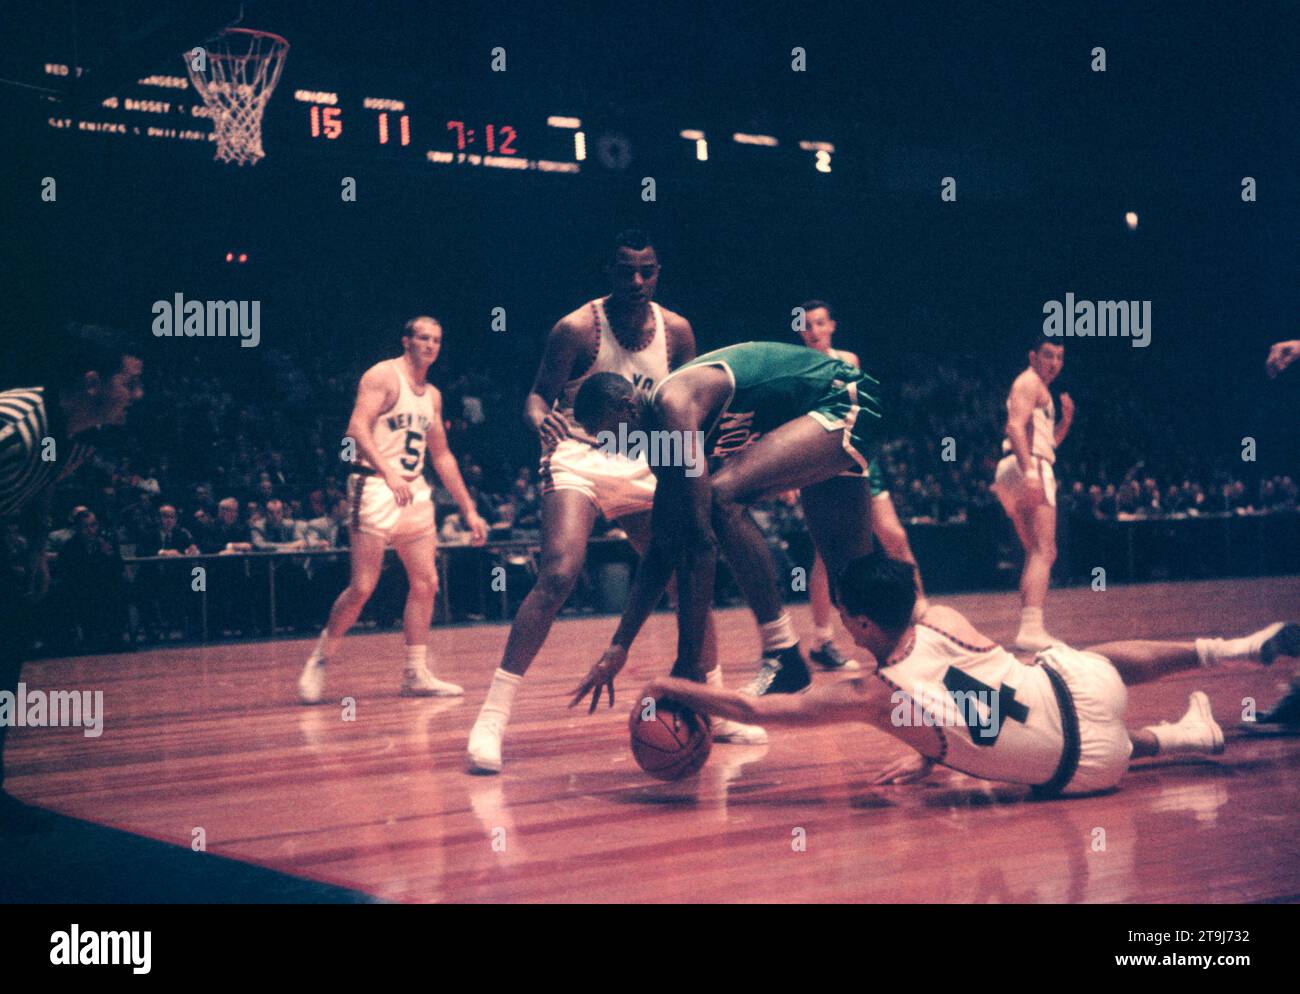 NEW YORK, NY - OCTOBER 25: Bill Russell #6 of the Boston Celtics fights for the ball with Carl Braun #4 and Willie Naulls #6 of the New York Knicks during an NBA game on October 25, 1958 at the Madison Square Garden in New York, New York.  (Photo by Hy Peskin) *** Local Caption *** Bill Russell;Carl Braun;Willie Naulls Stock Photo